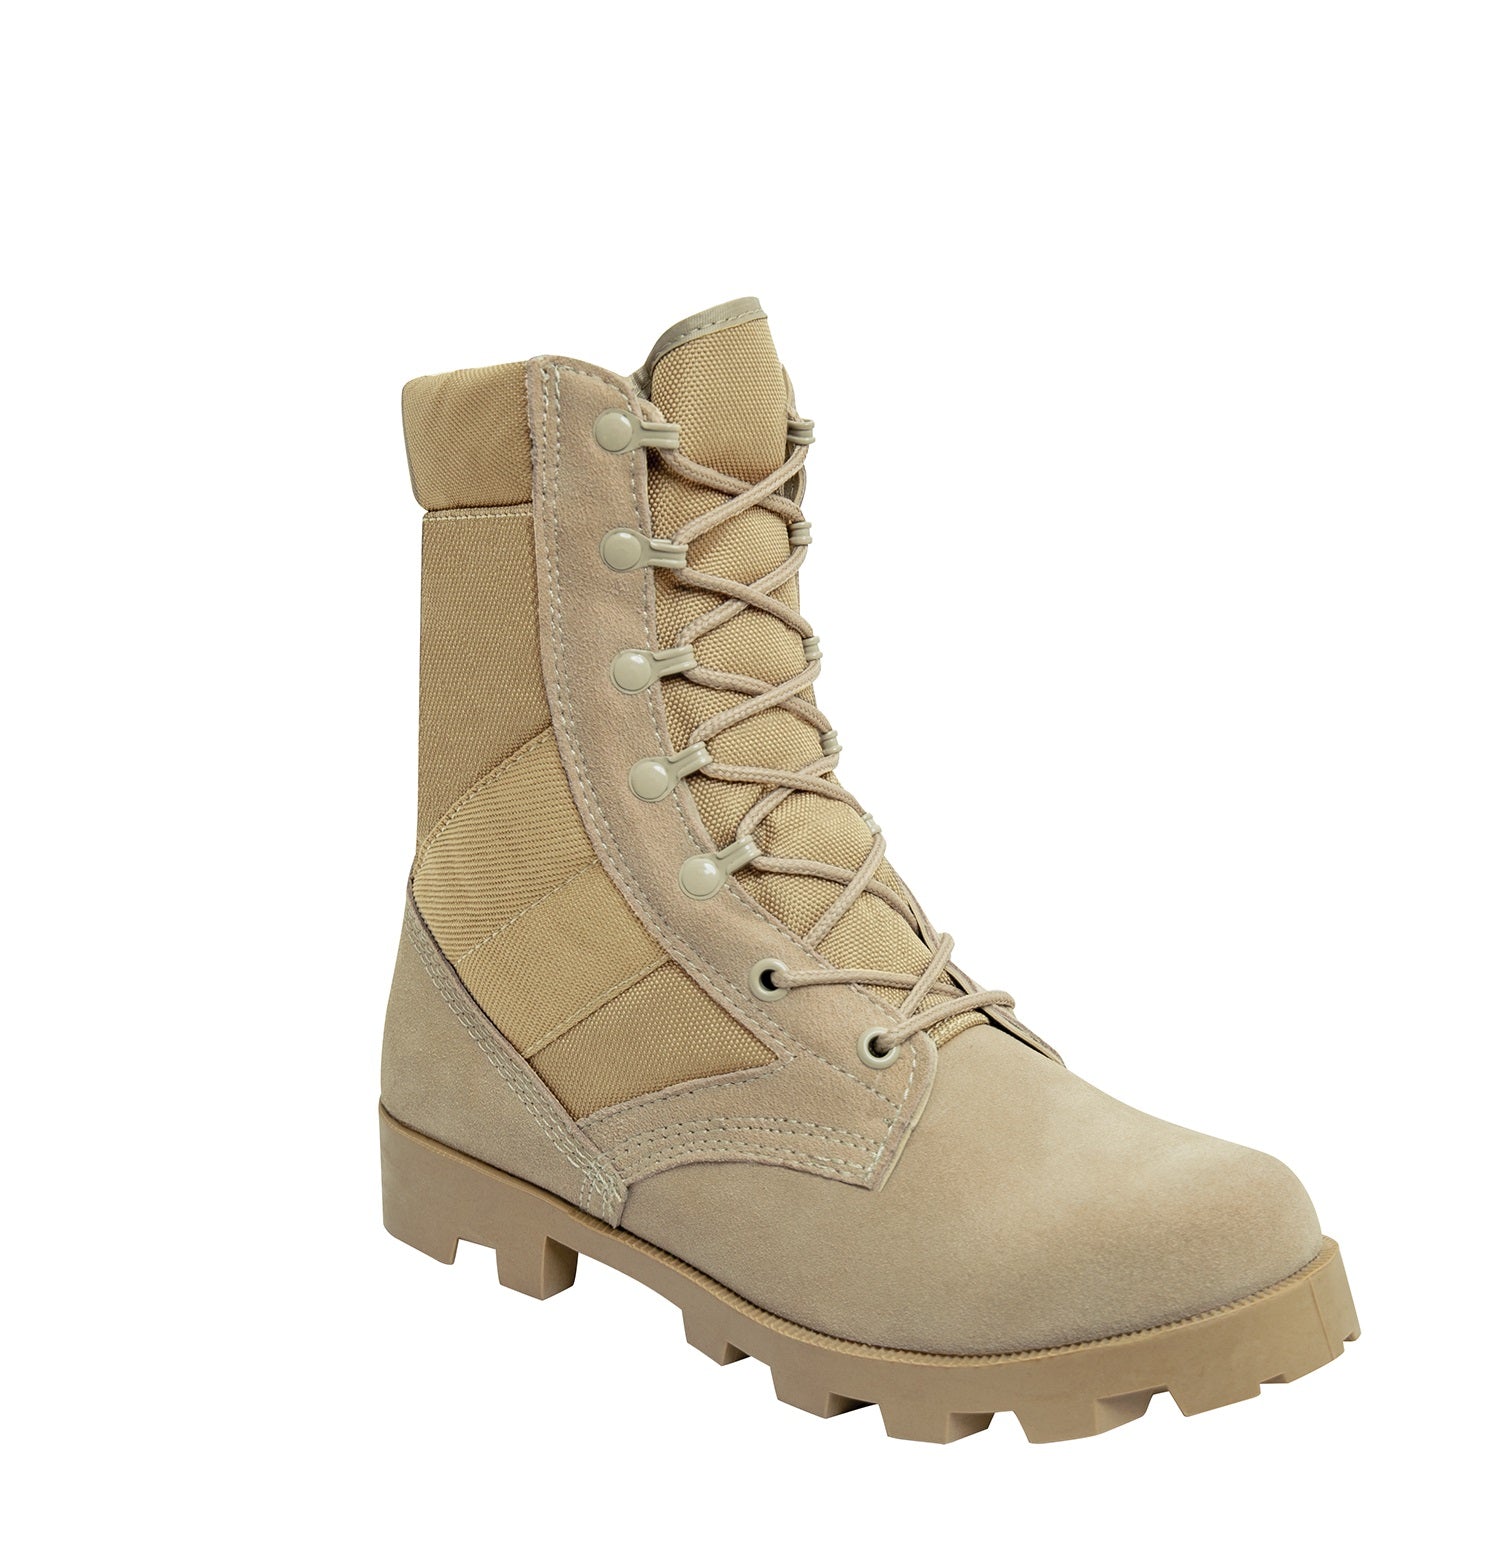 Rothco G.I. Type Speedlace Combat / Jungle Boot -Coyote Brown